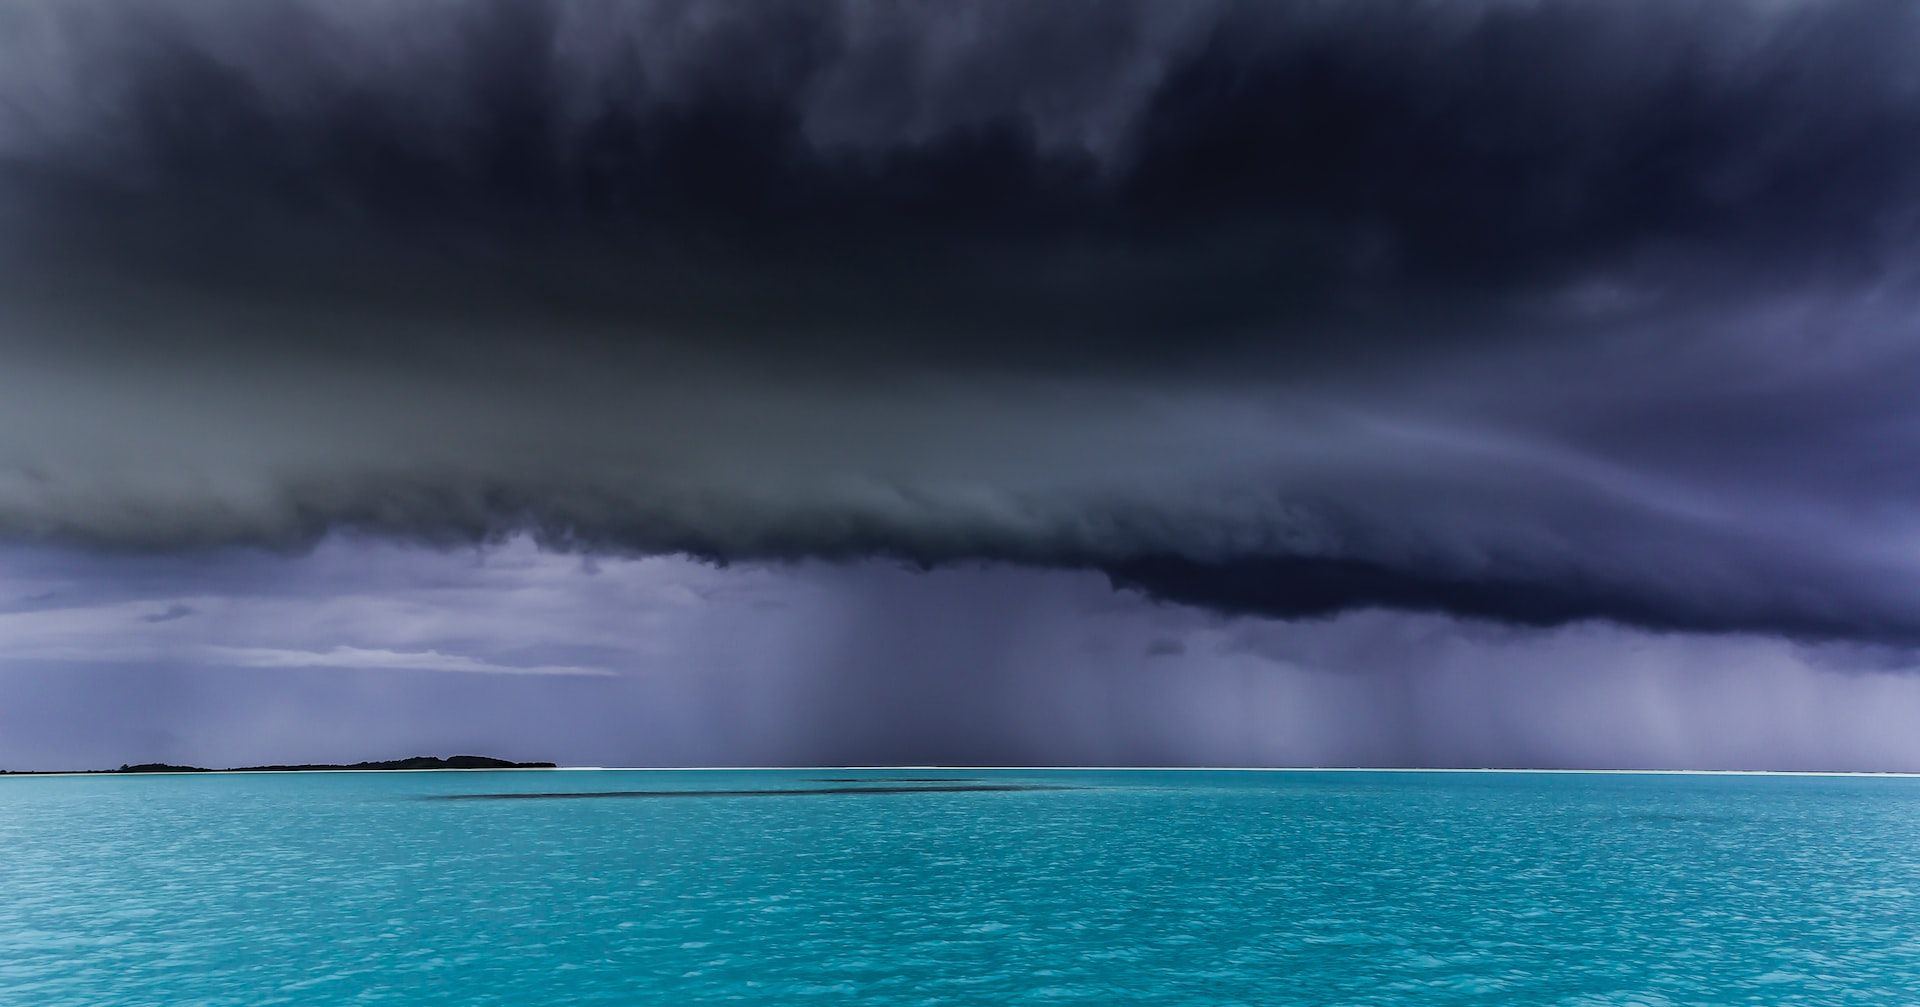 10 Motivational Quotes About Storms